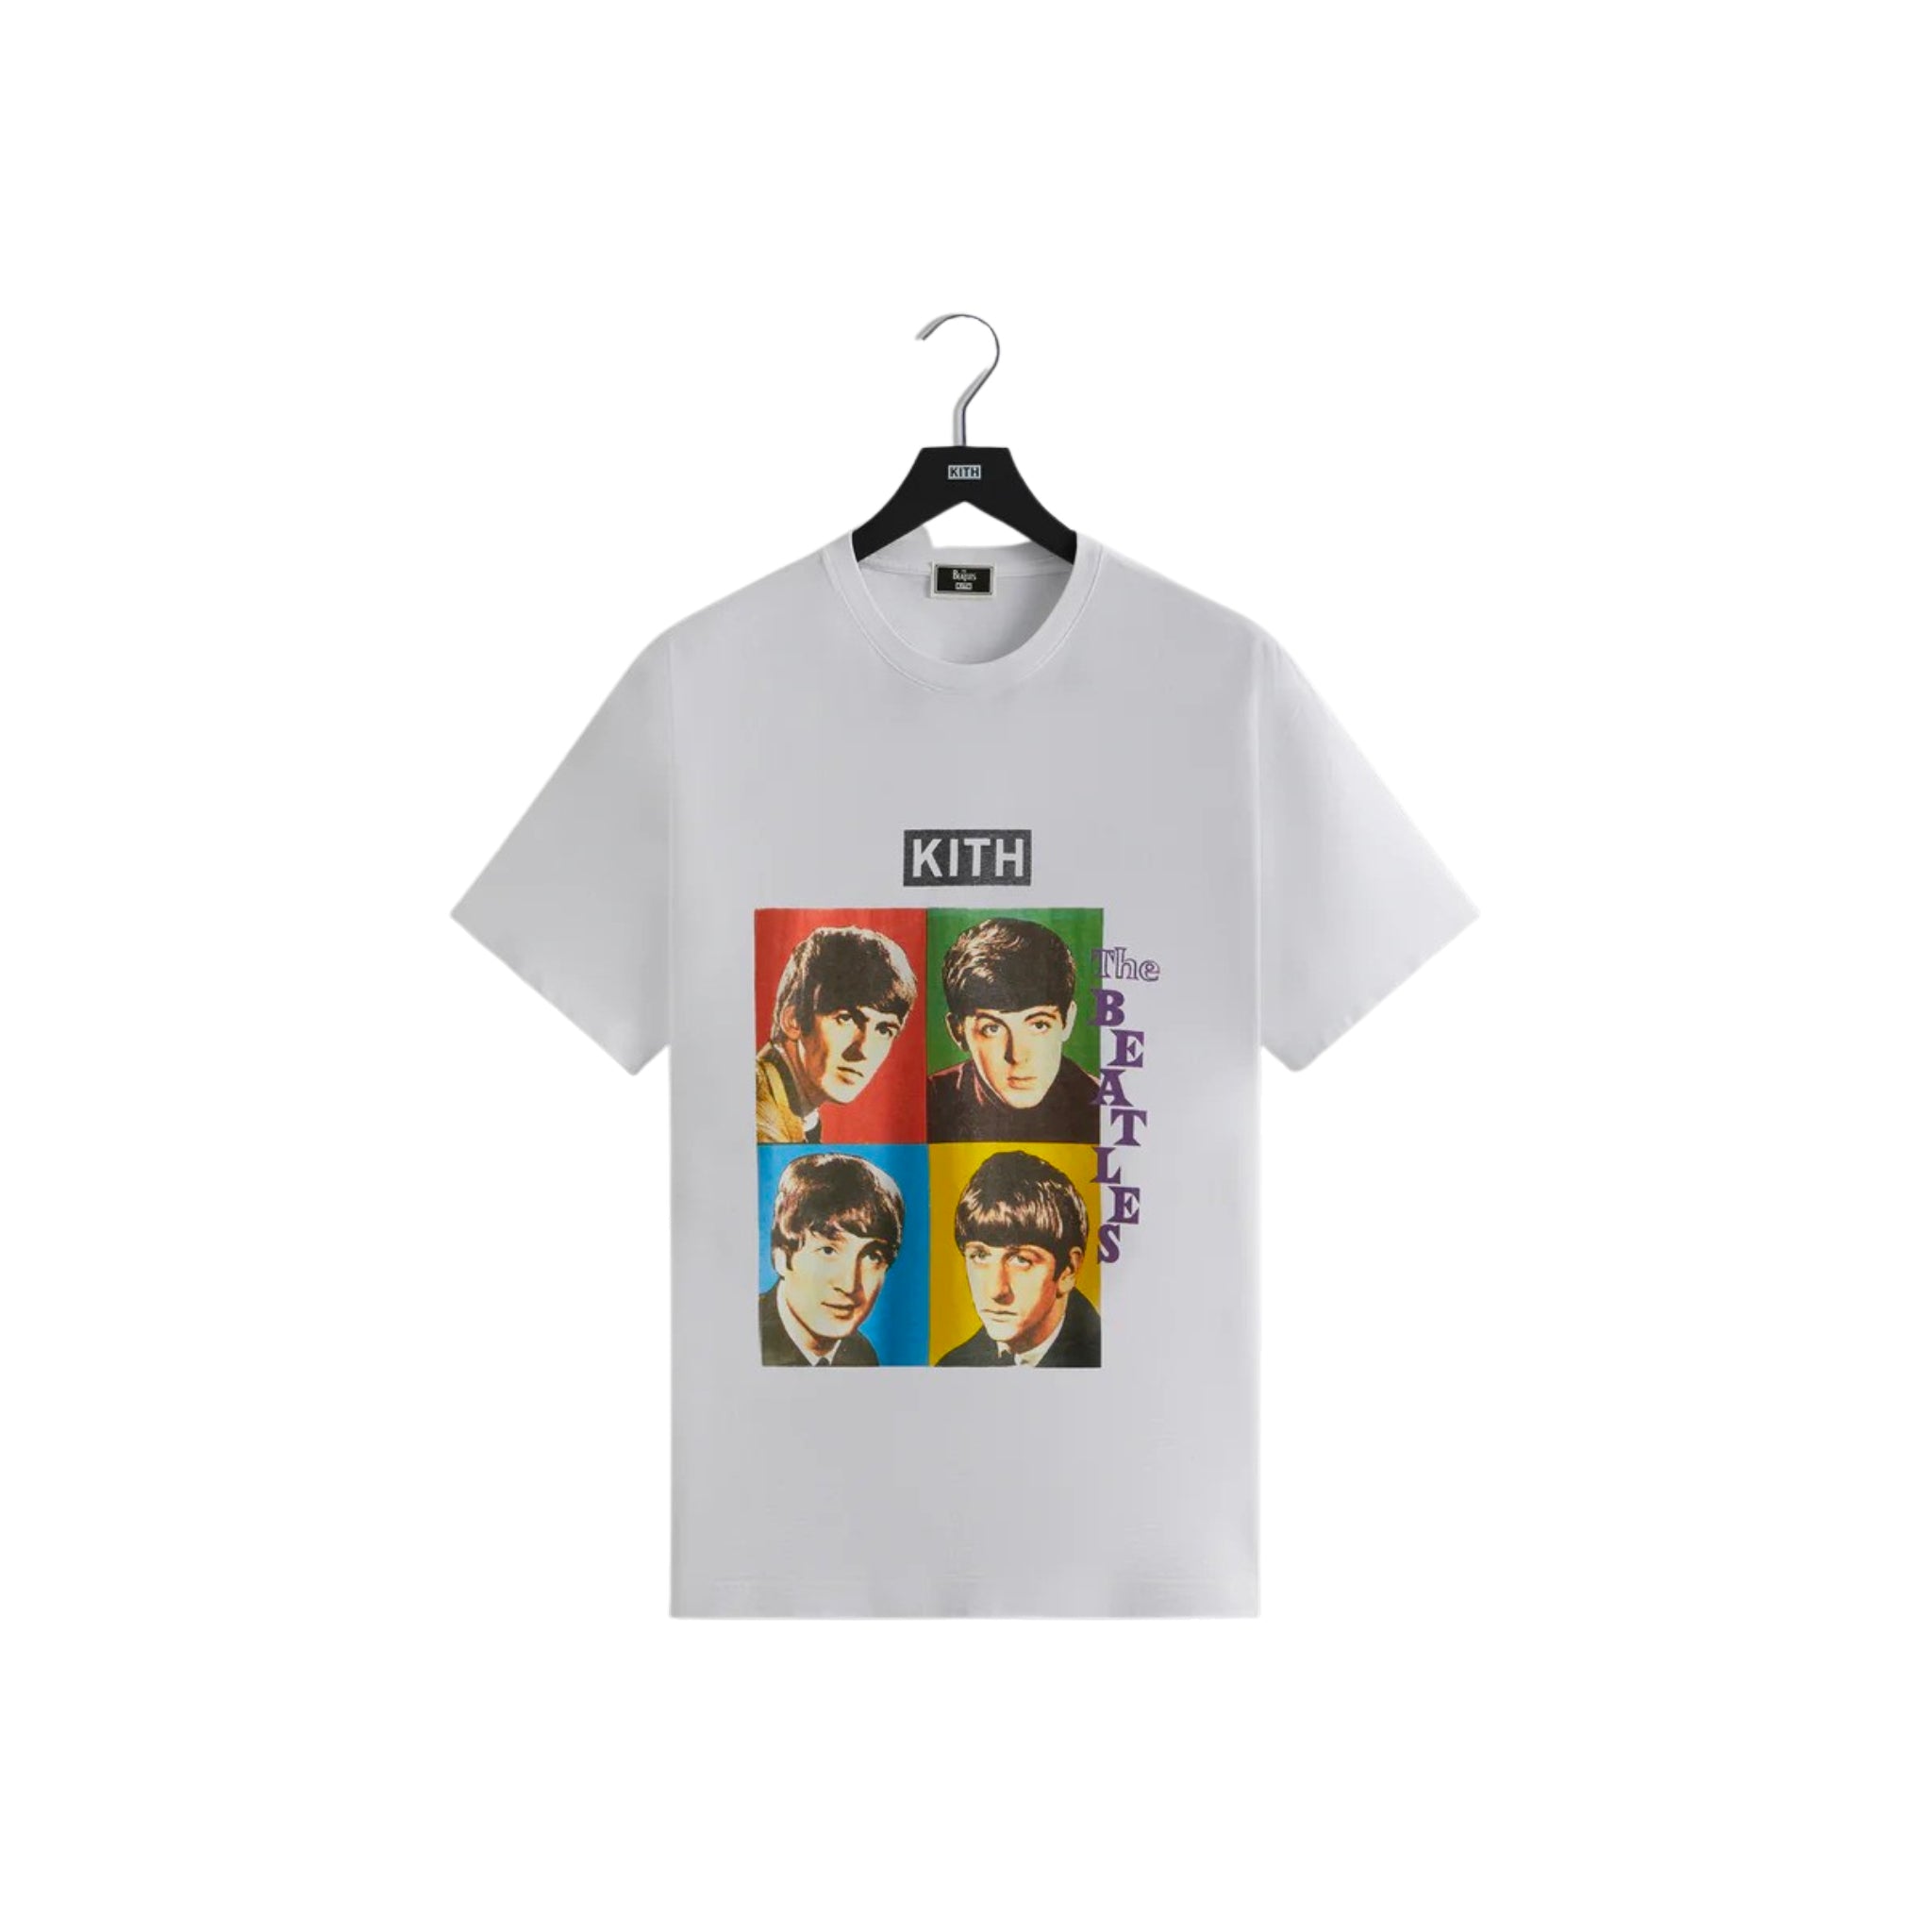 Kith for The Beatles 1962 Vintage Tee